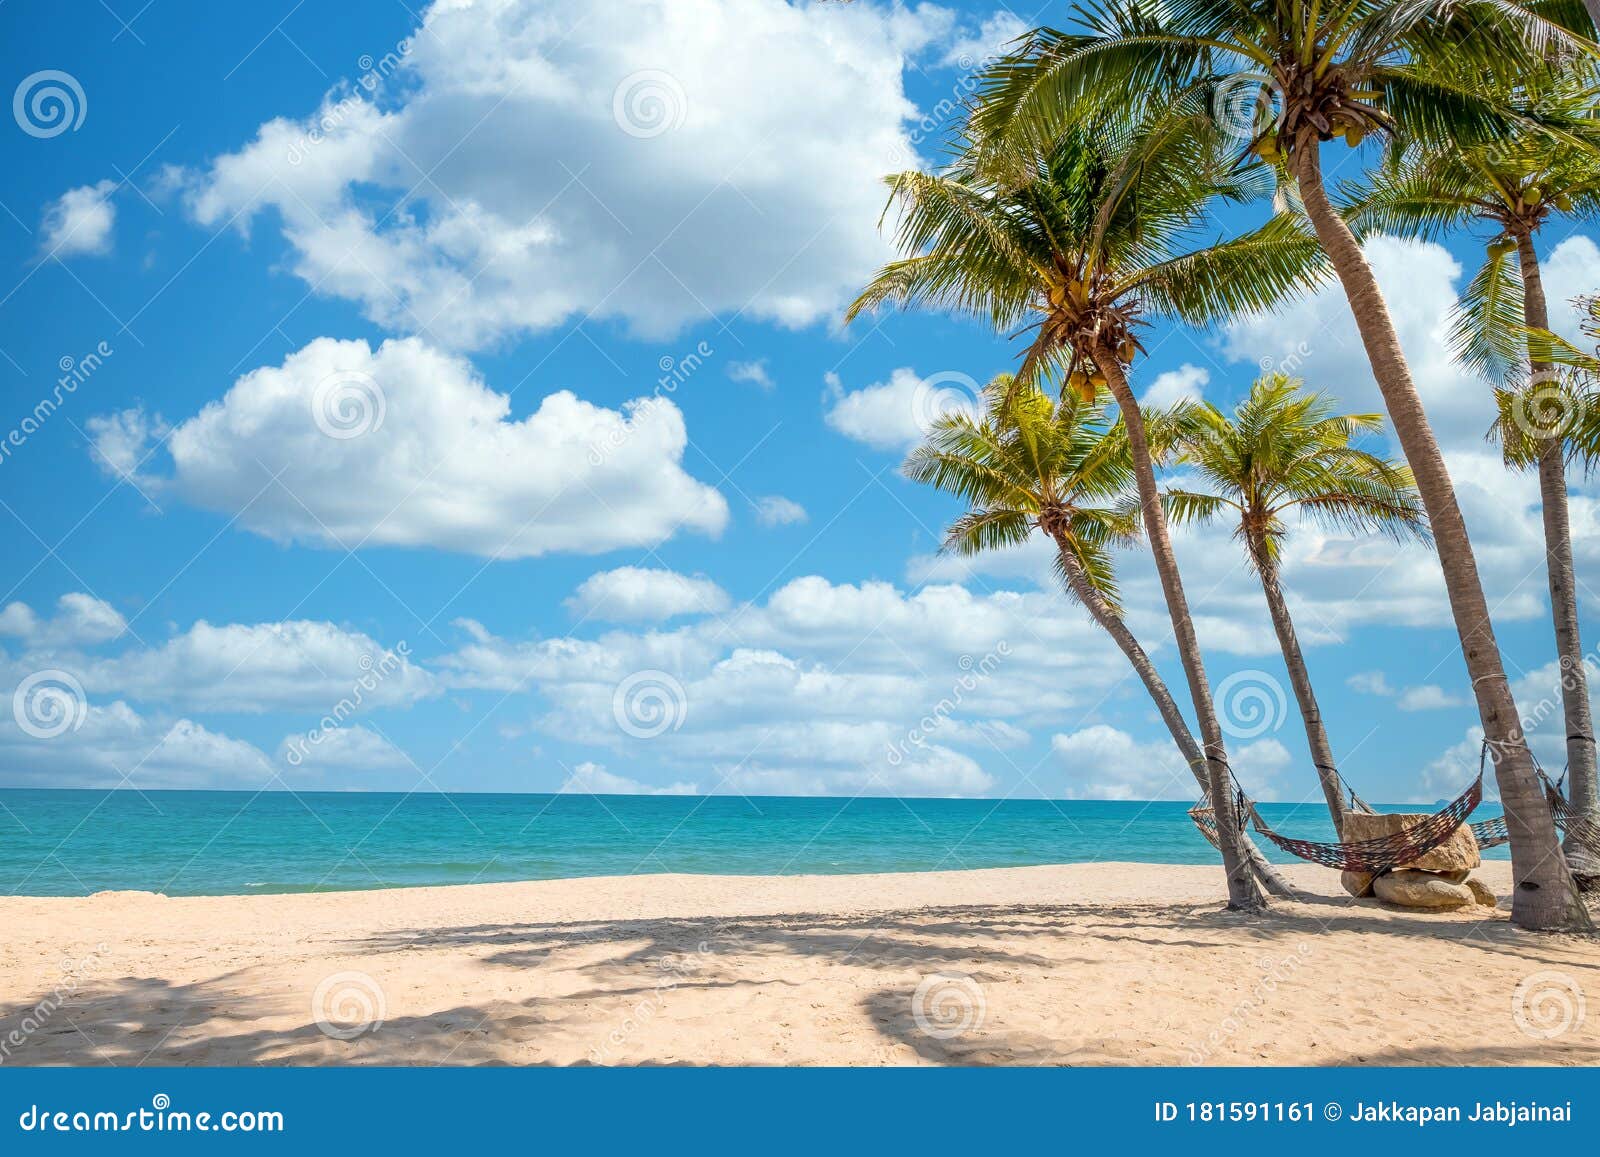 86 656 Tropical Beach Wallpaper Photos Free Royalty Free Stock Photos From Dreamstime